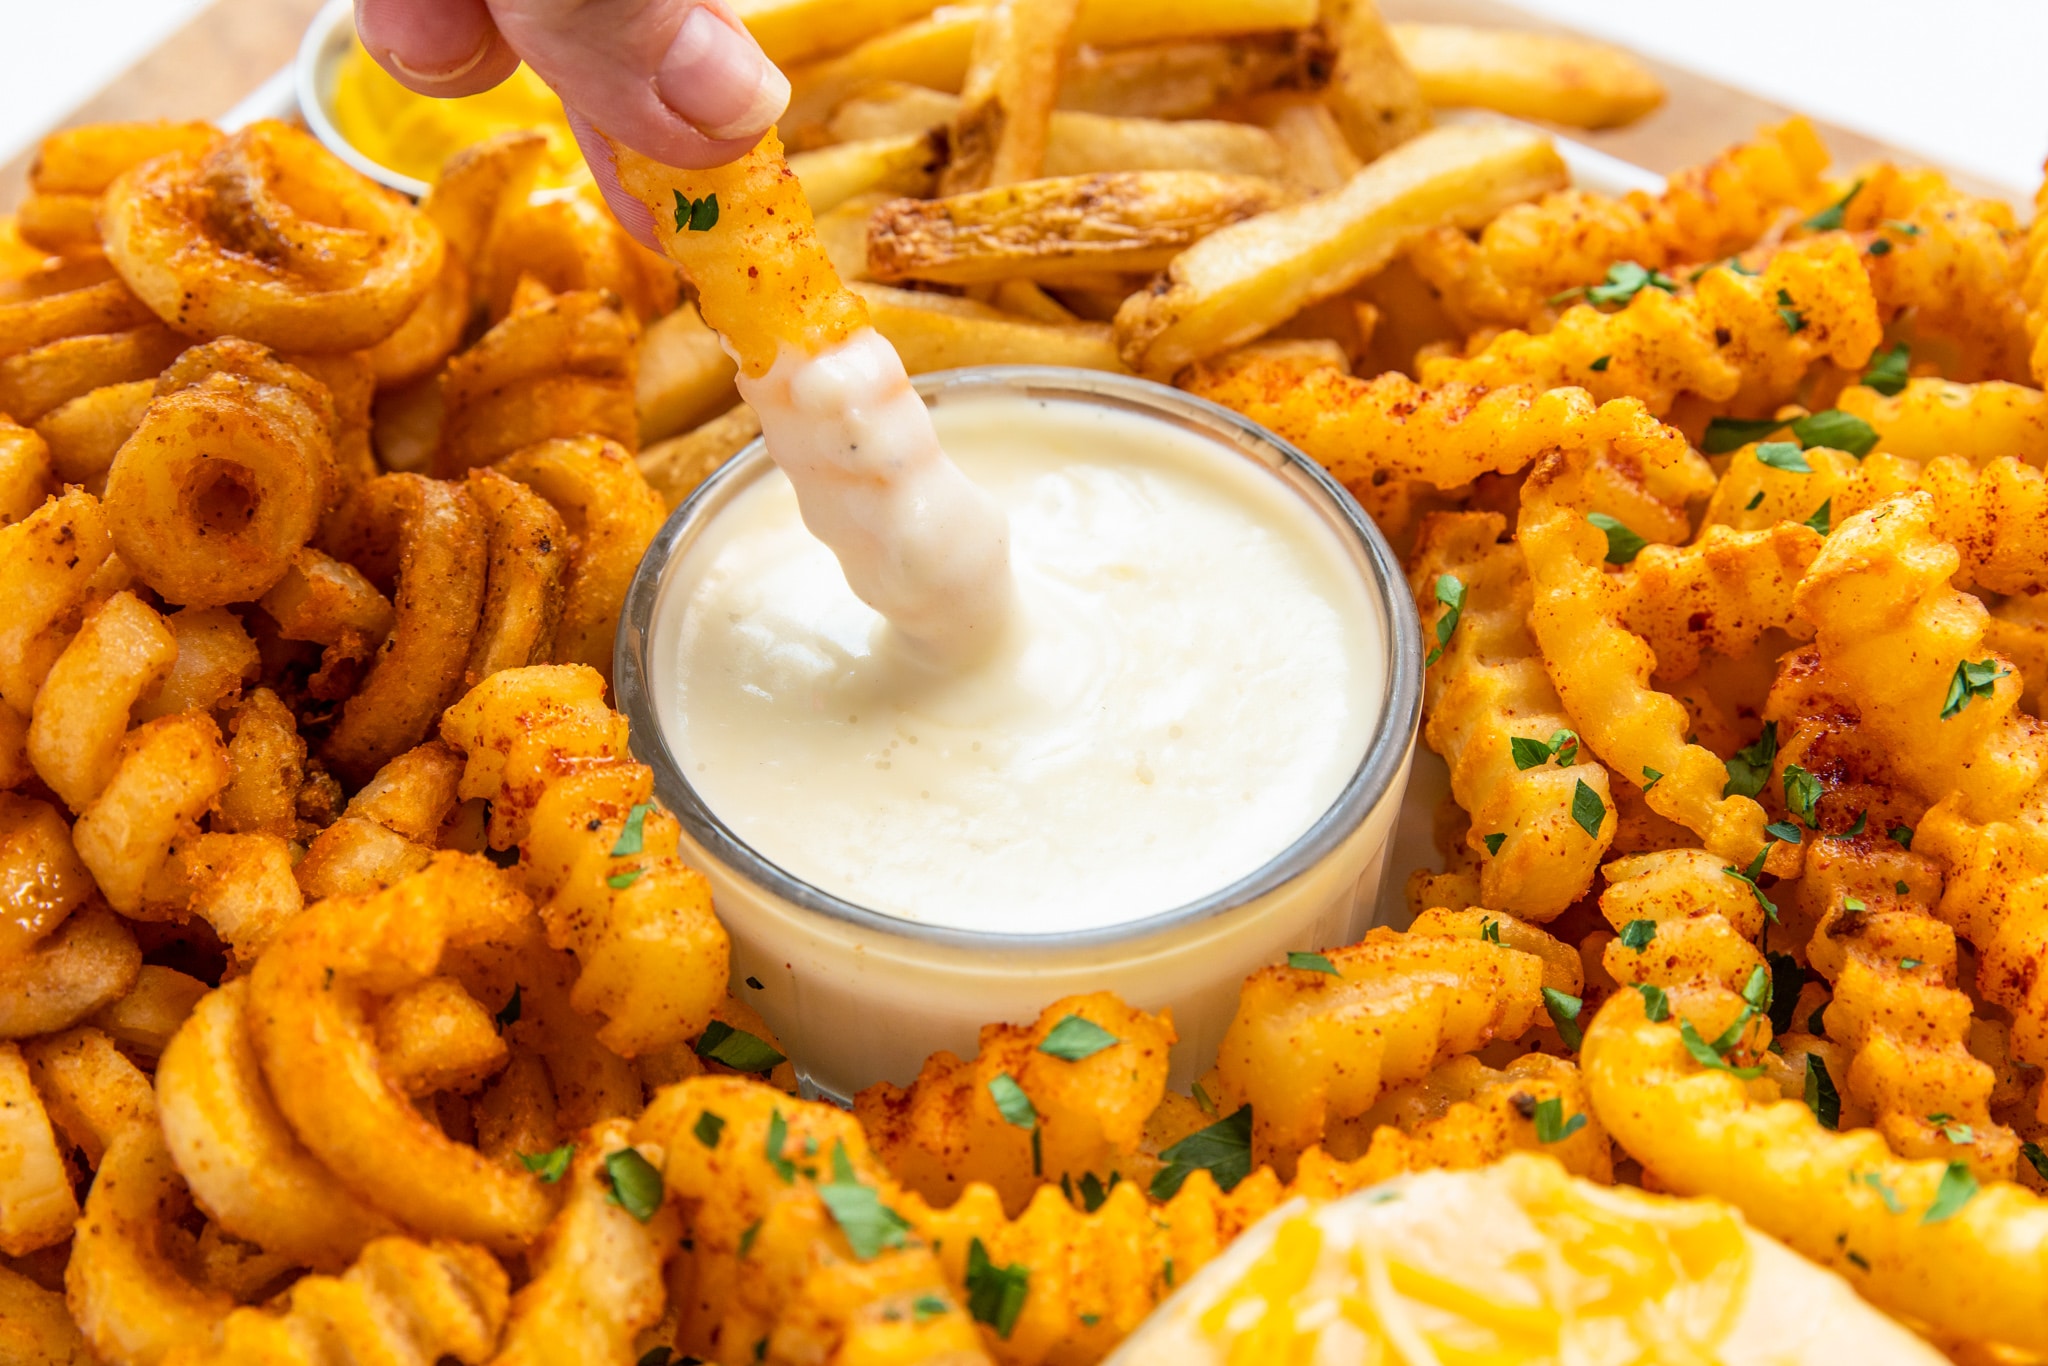 A finger dipping a fry in mayo, adding a tangy twist to the classic snack.